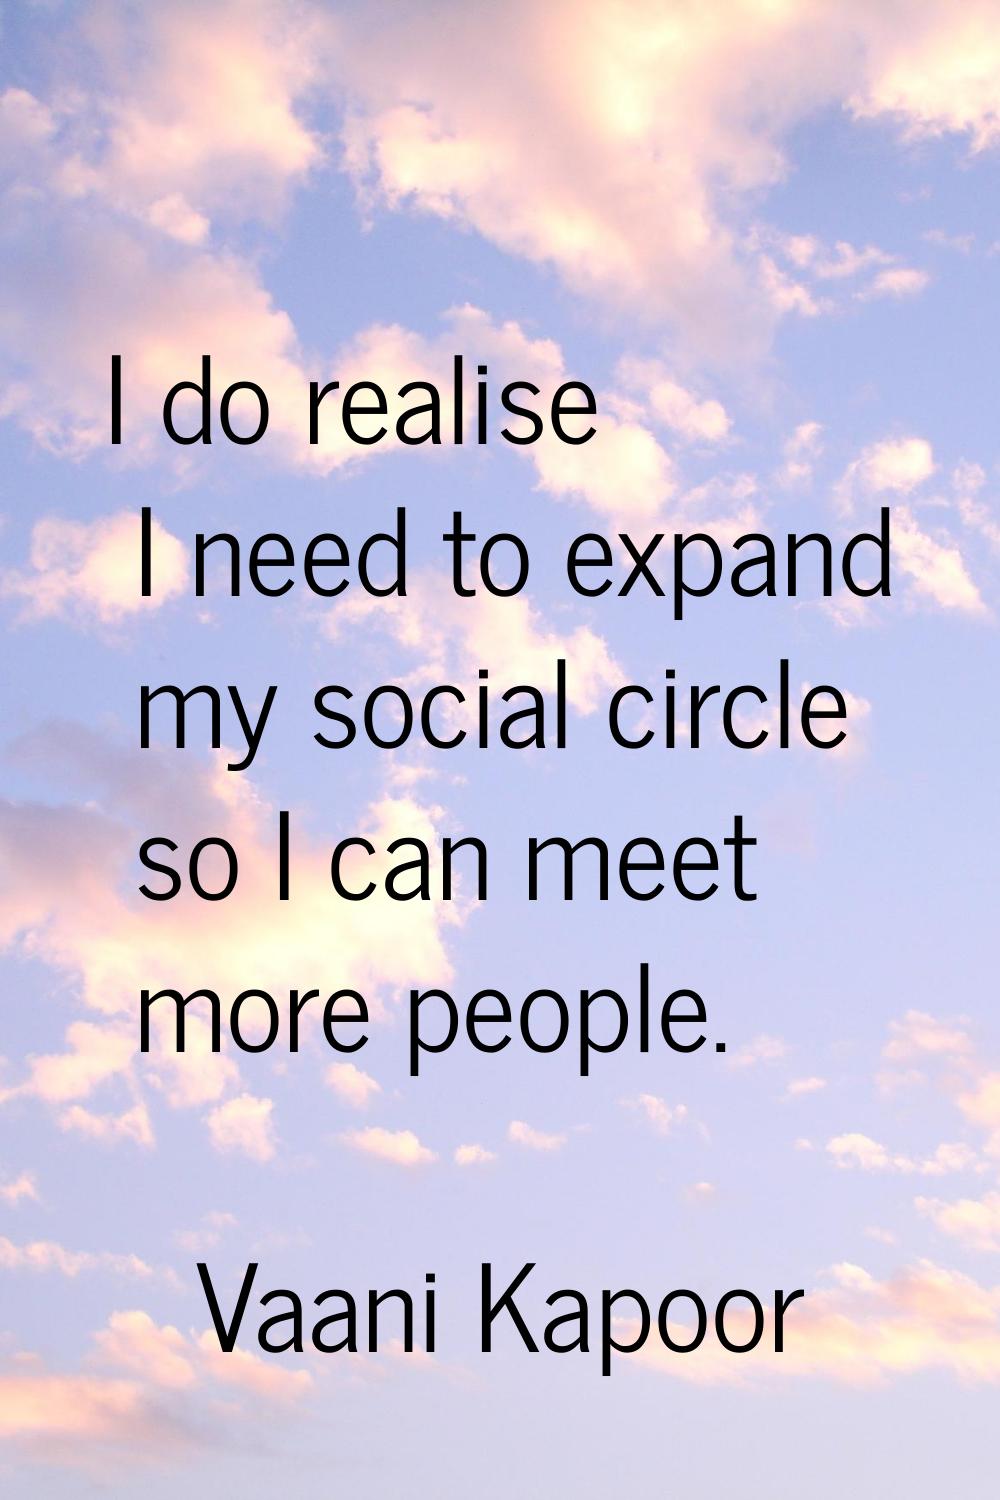 I do realise I need to expand my social circle so I can meet more people.